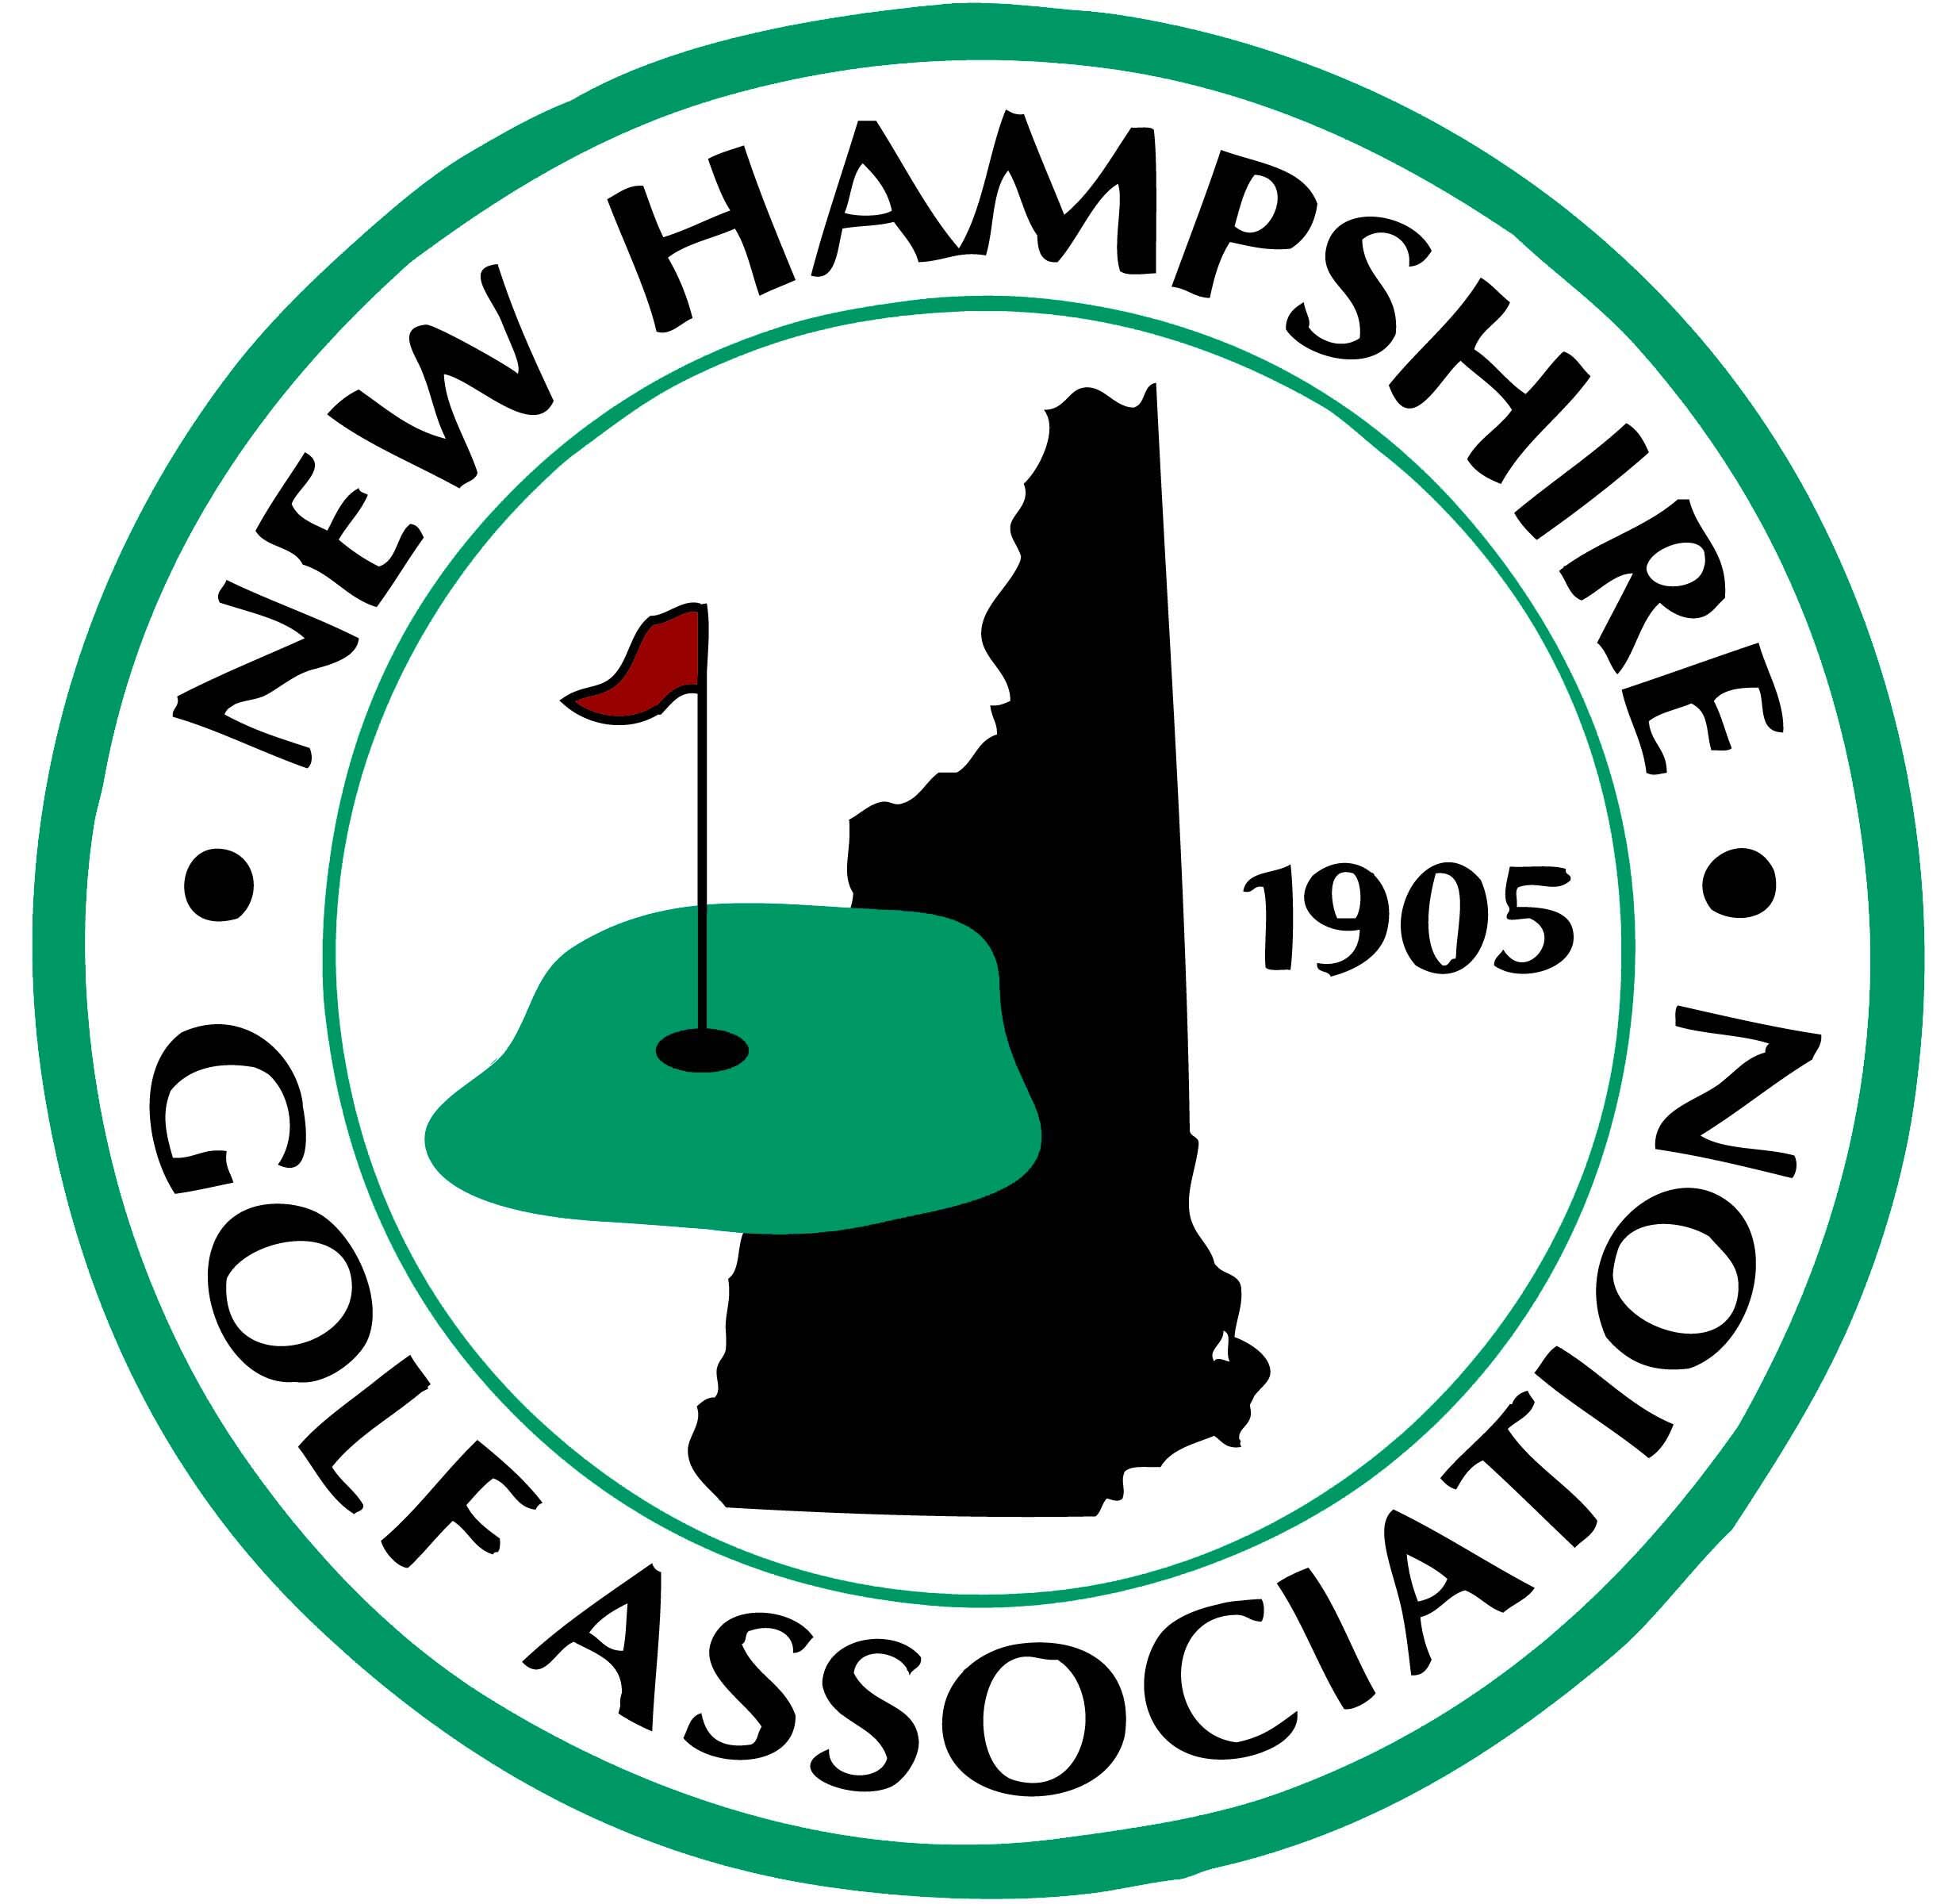 The Official Twitter Account of the New Hampshire Golf Association.